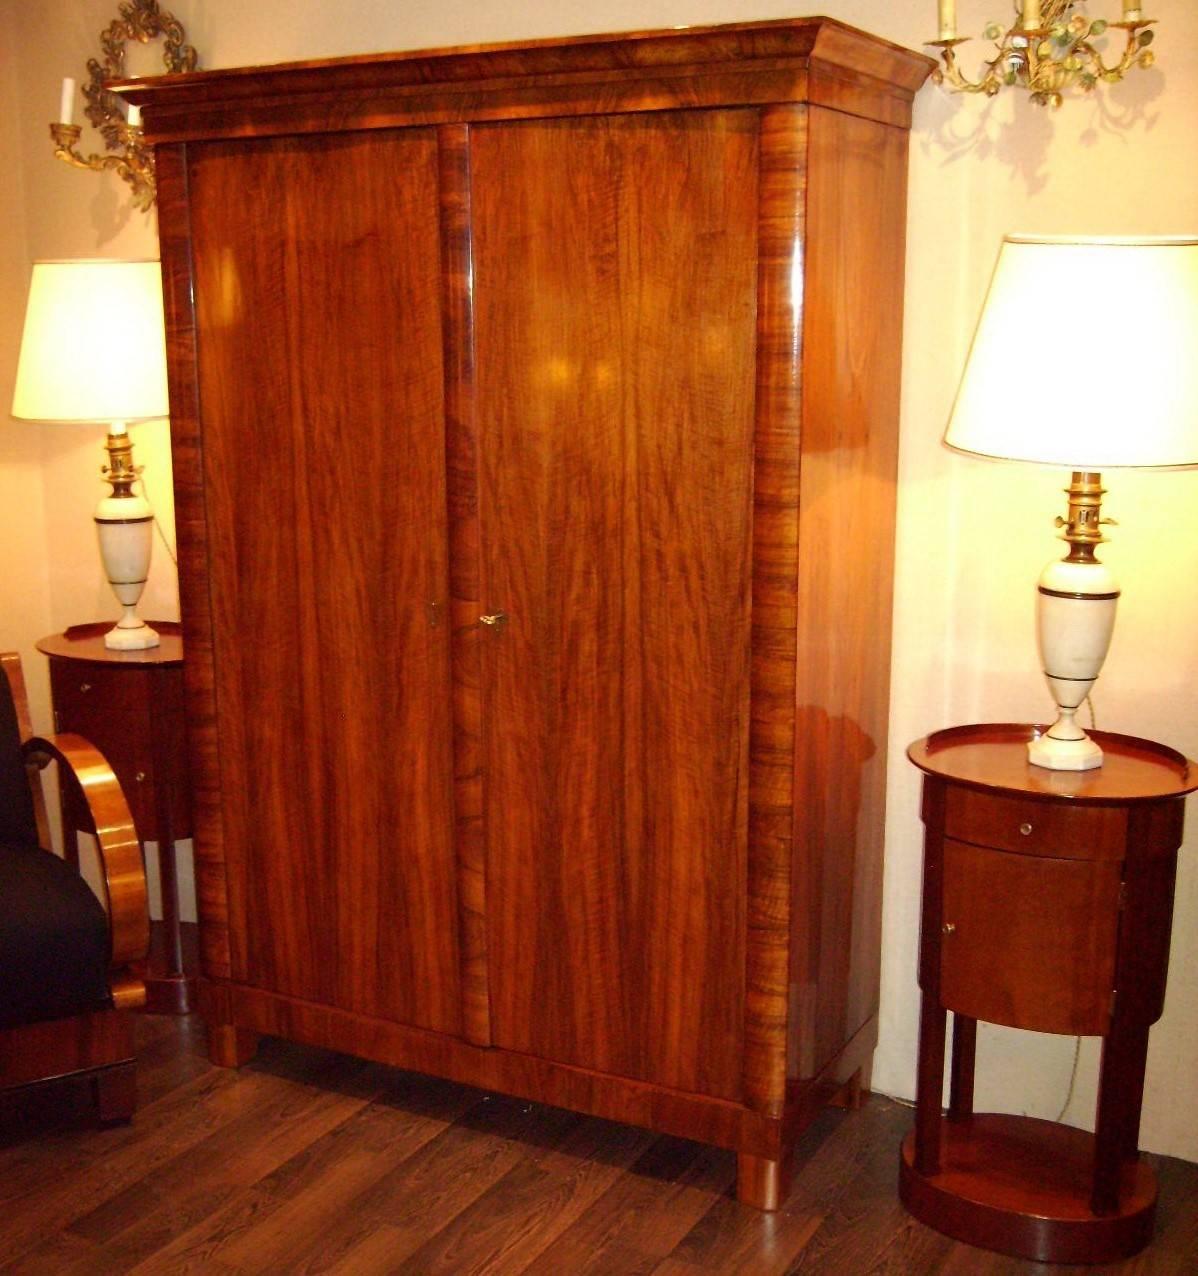 A Very fine wardrobe with two doors, veneered in walnut with open stain. Austrian Empire, first half of the 19th century, Epic Biedermeier. Dimensions cm. 140 x 59 x 197